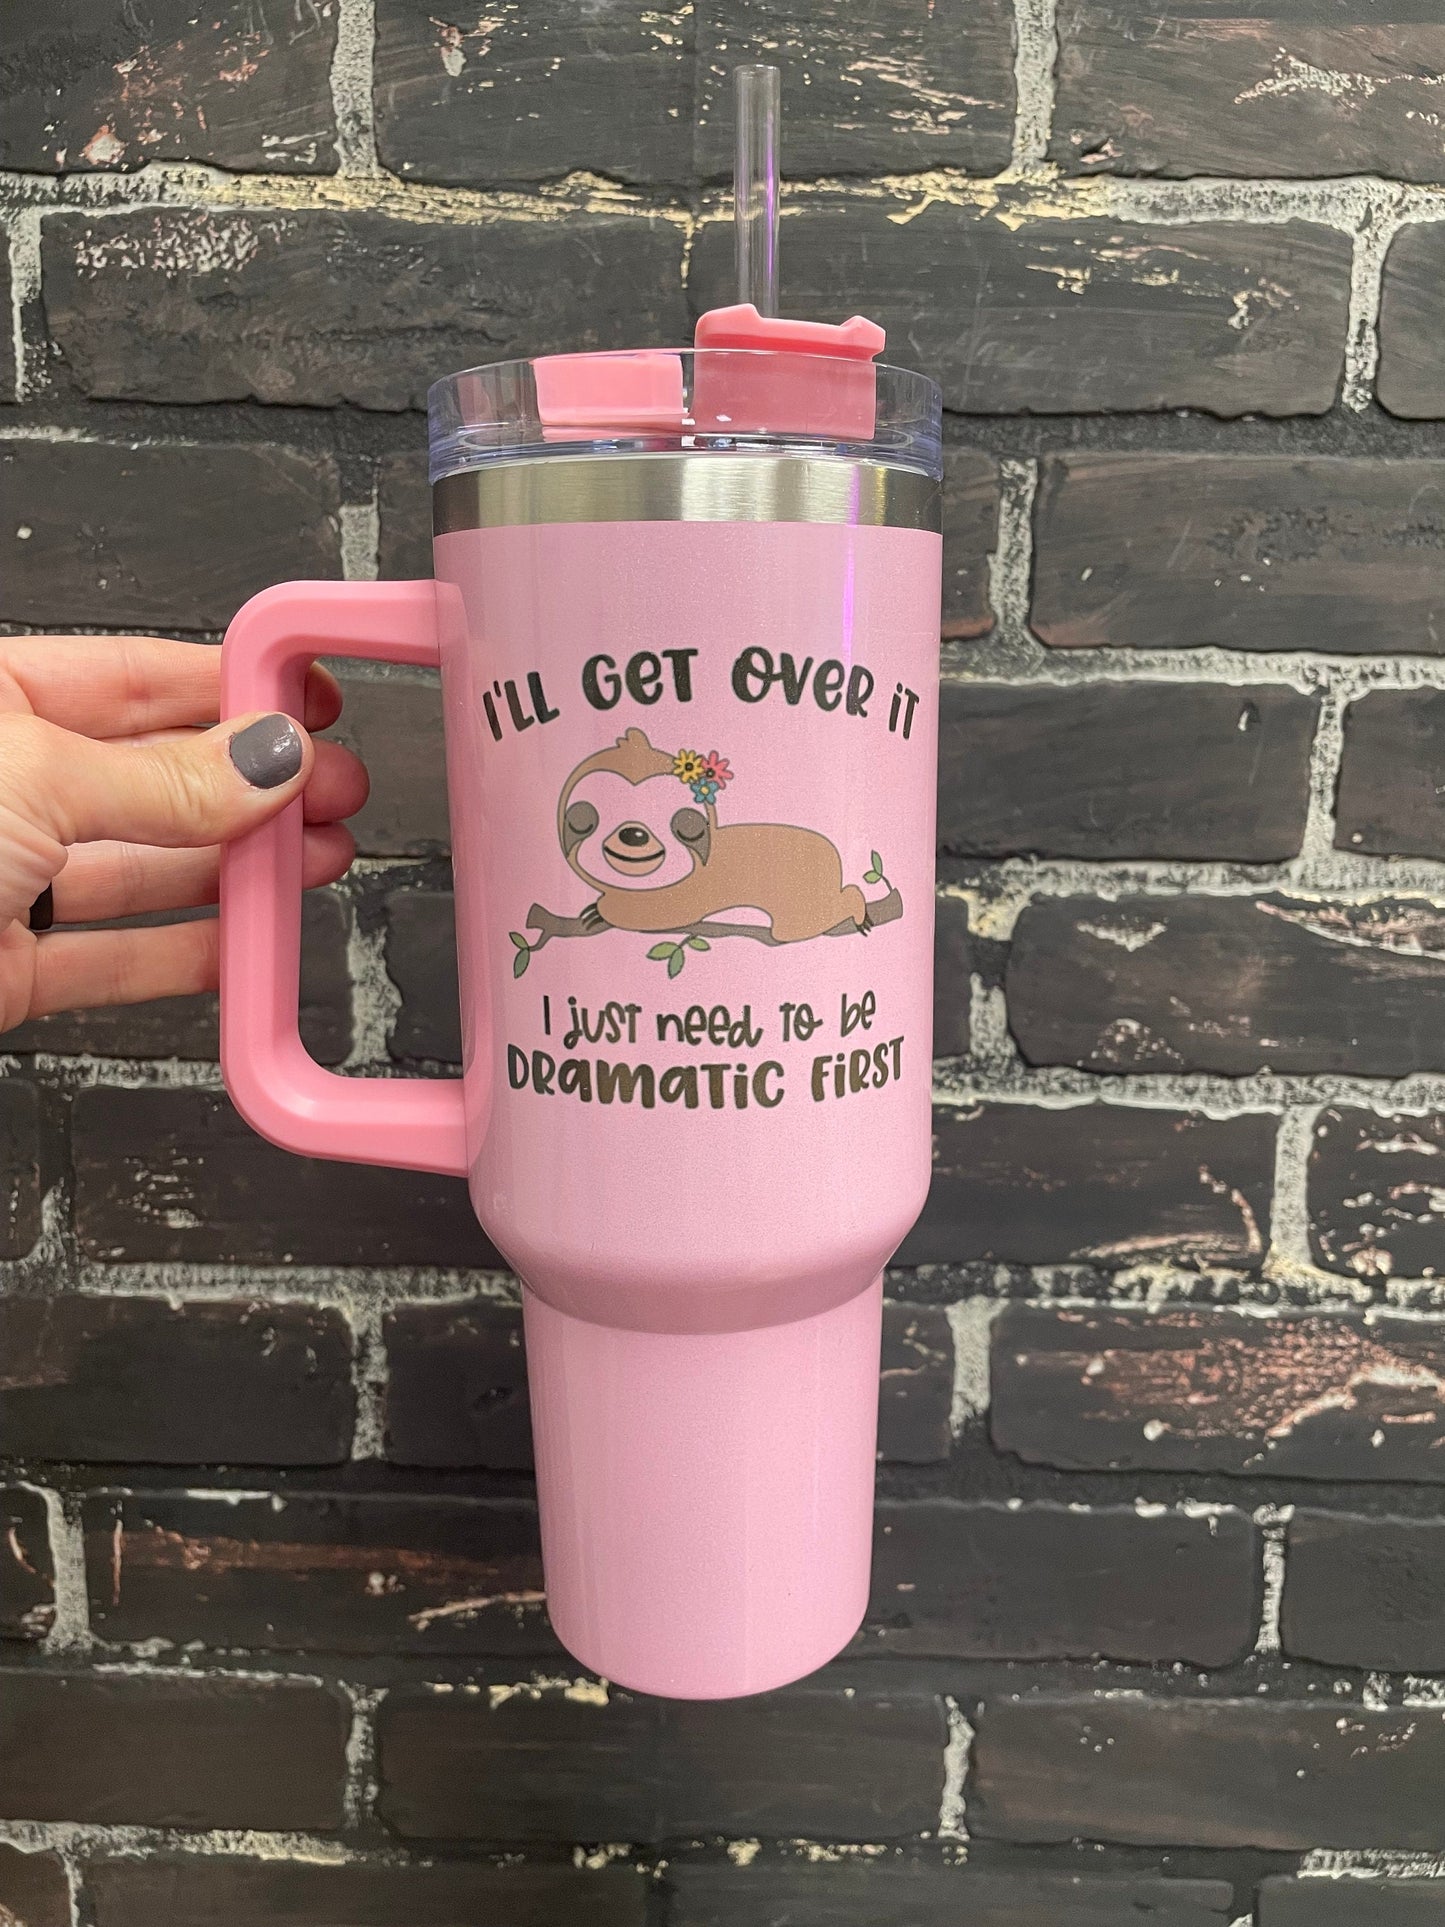 I’ll get over it but I’m going to be dramatic first, Pink Sloth 40oz Shimmer Tumbler w/handle and straw